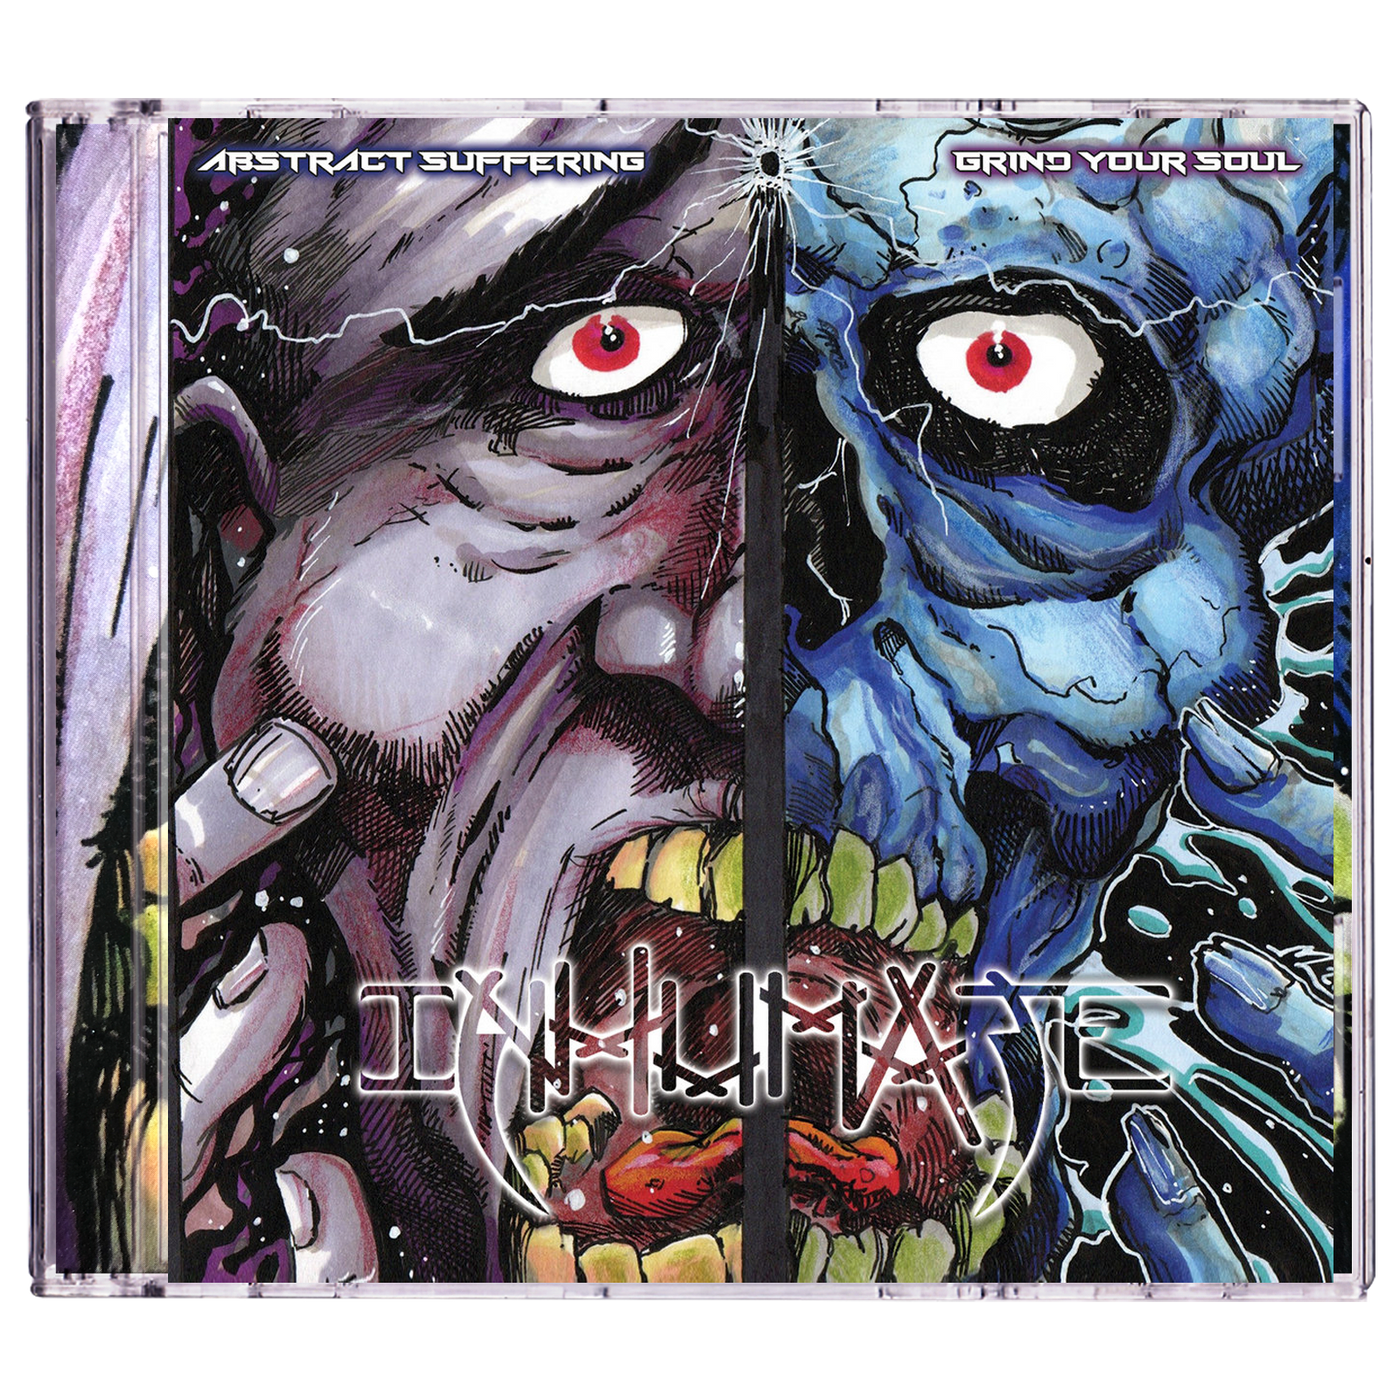 Inhumate 'Abstract Suffering / Grind Your Soul' CD